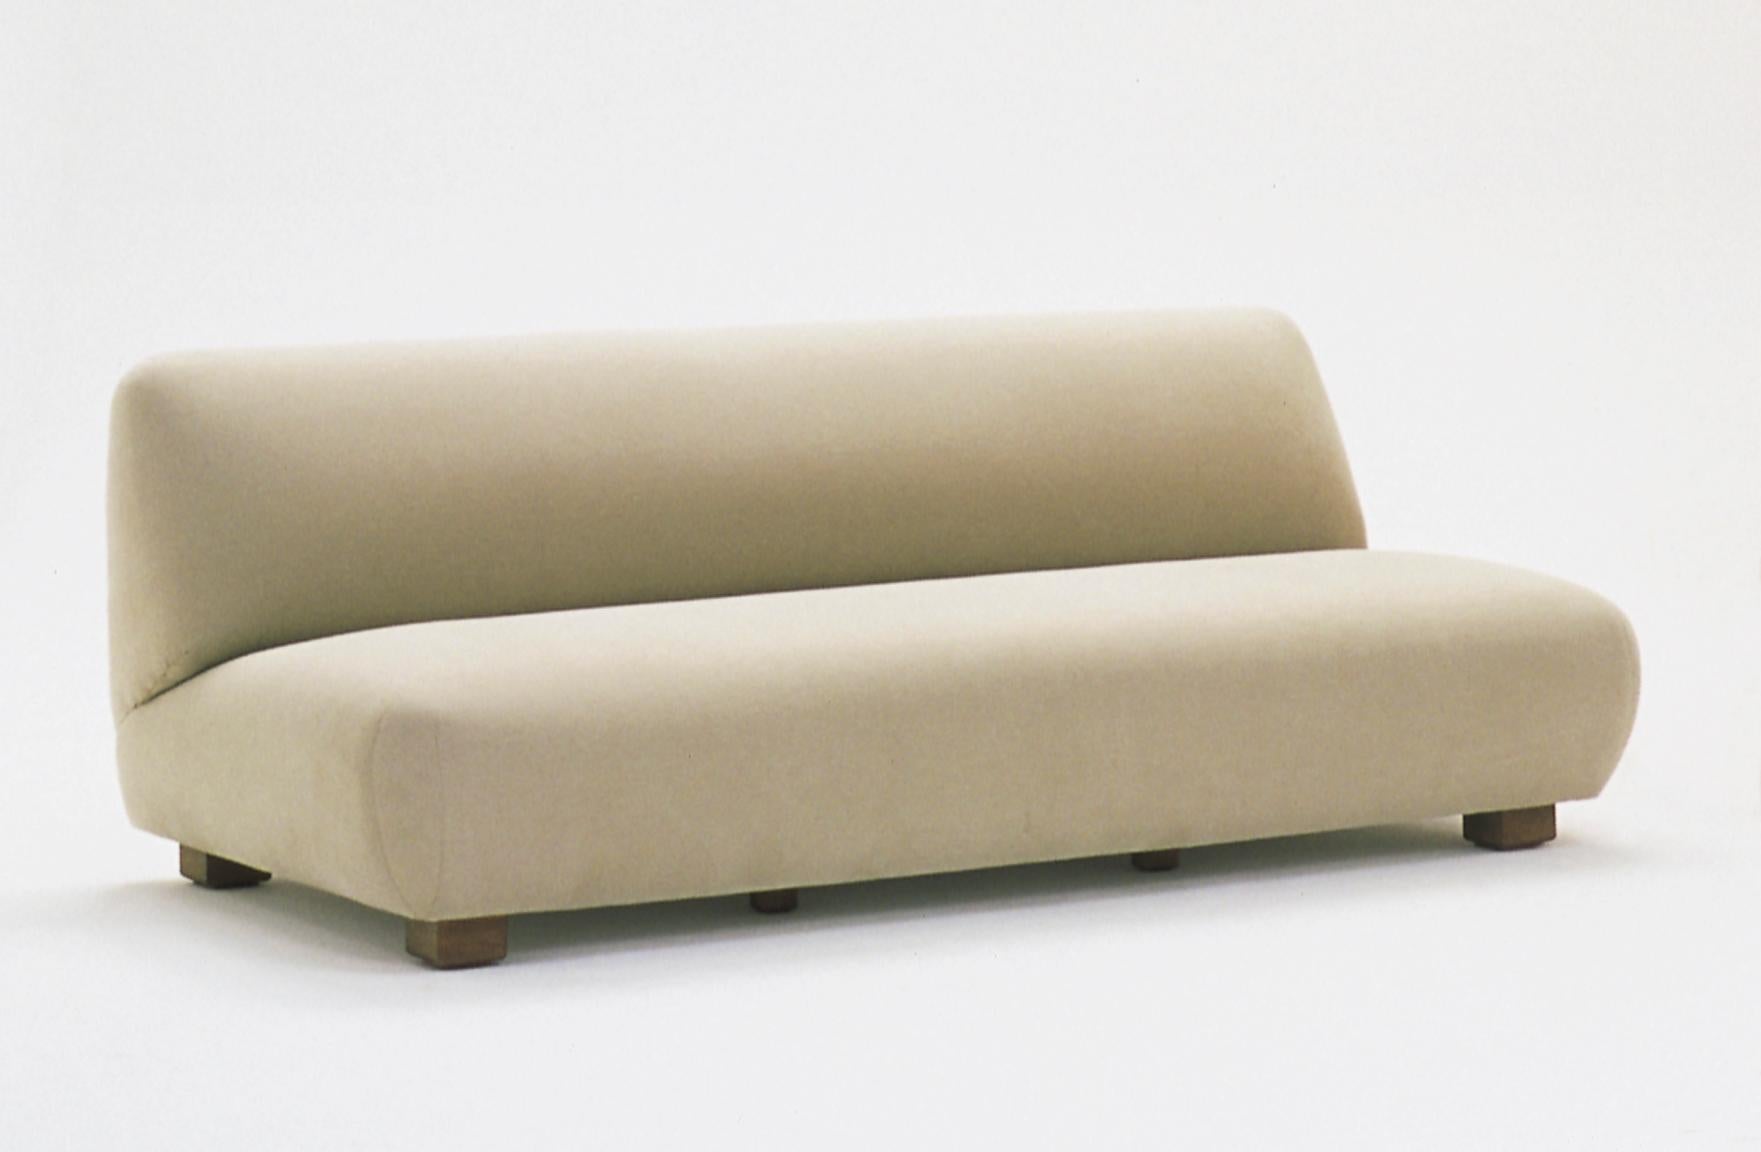 Two seat cadaqués sofa by Federico Correa, Alfonso Milá
Dimensions: D 100 x W 200 x H 75 cm
Materials: beech wood, fabric.
Available in other fabrics and in 2 sizes: L200 (two seat), L250 (three seat) cm.

The Cadaqués ensemble sums up an